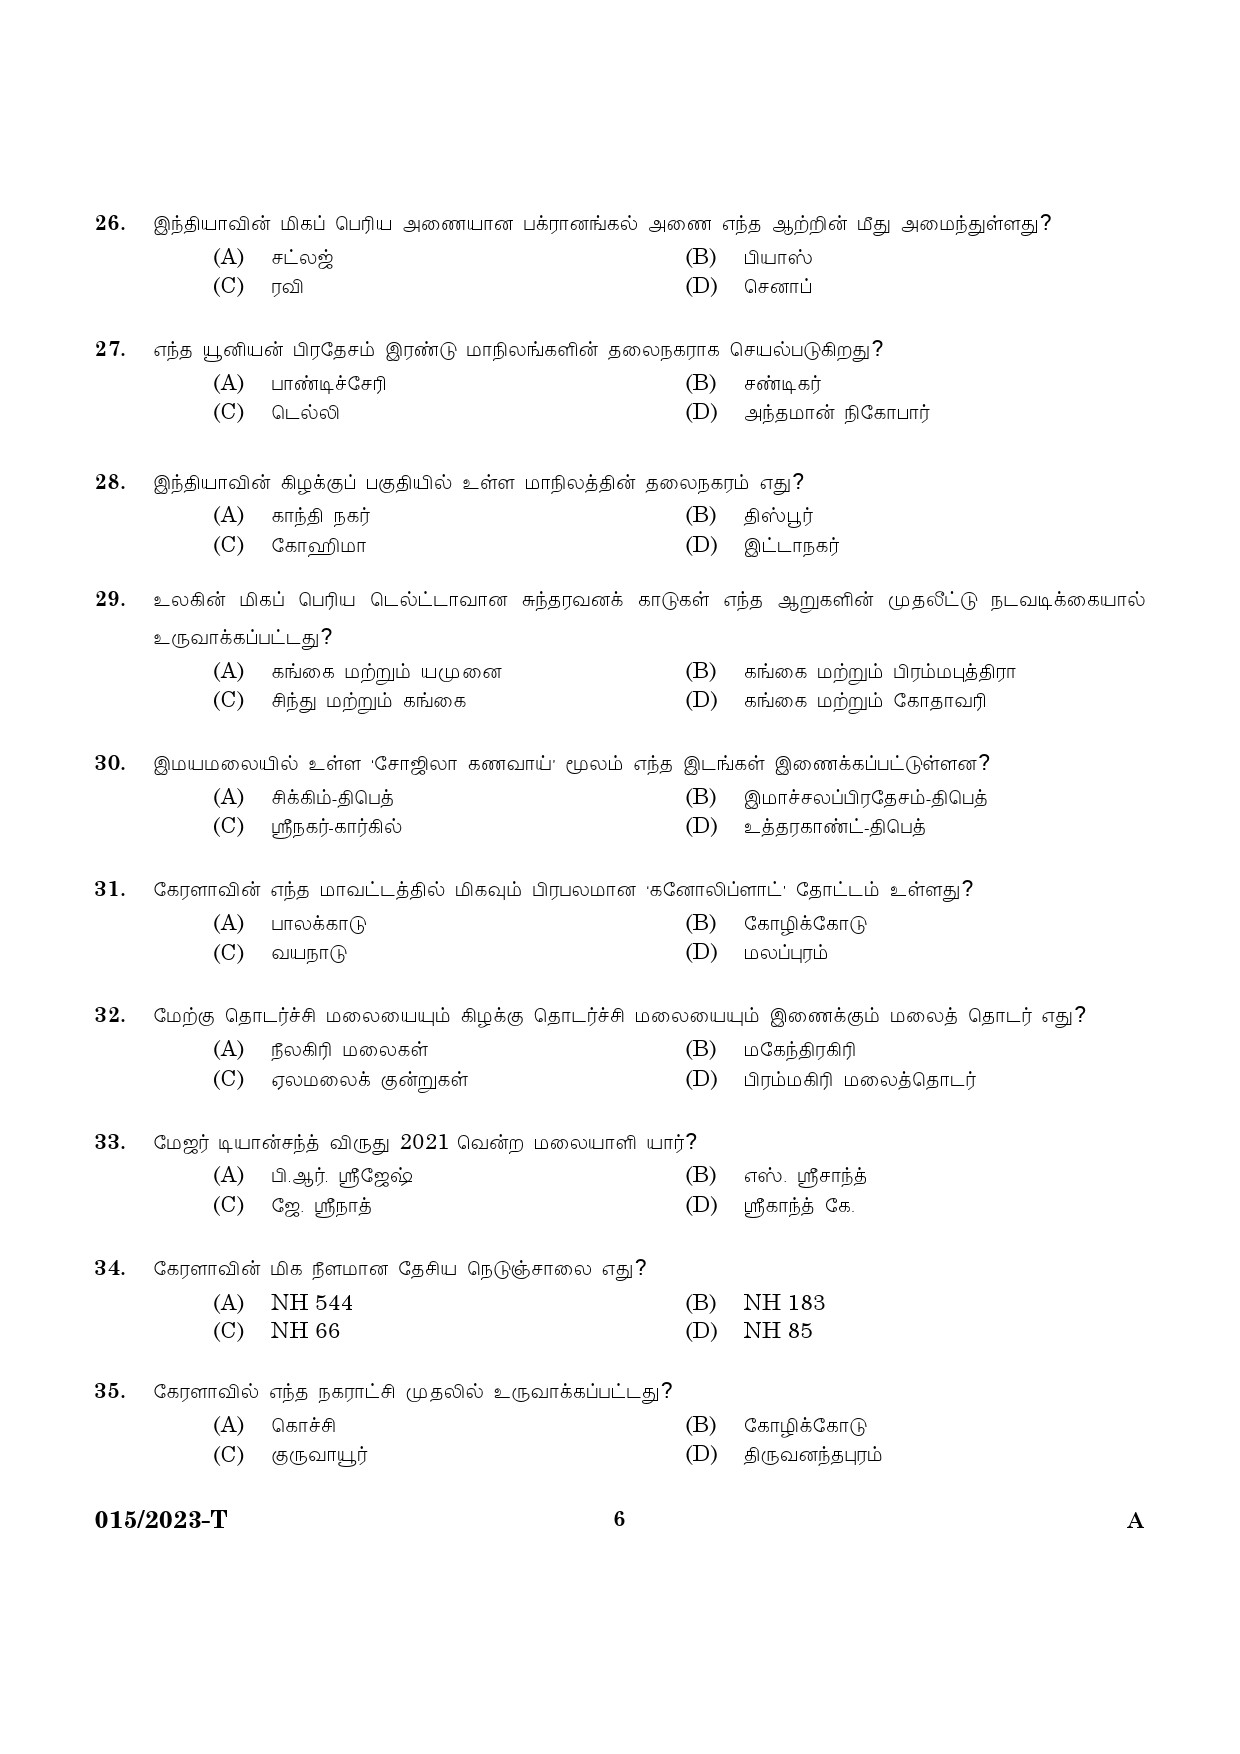 KPSC Driver and Office Attendant Tamil Exam 2023 Code 0152023 4